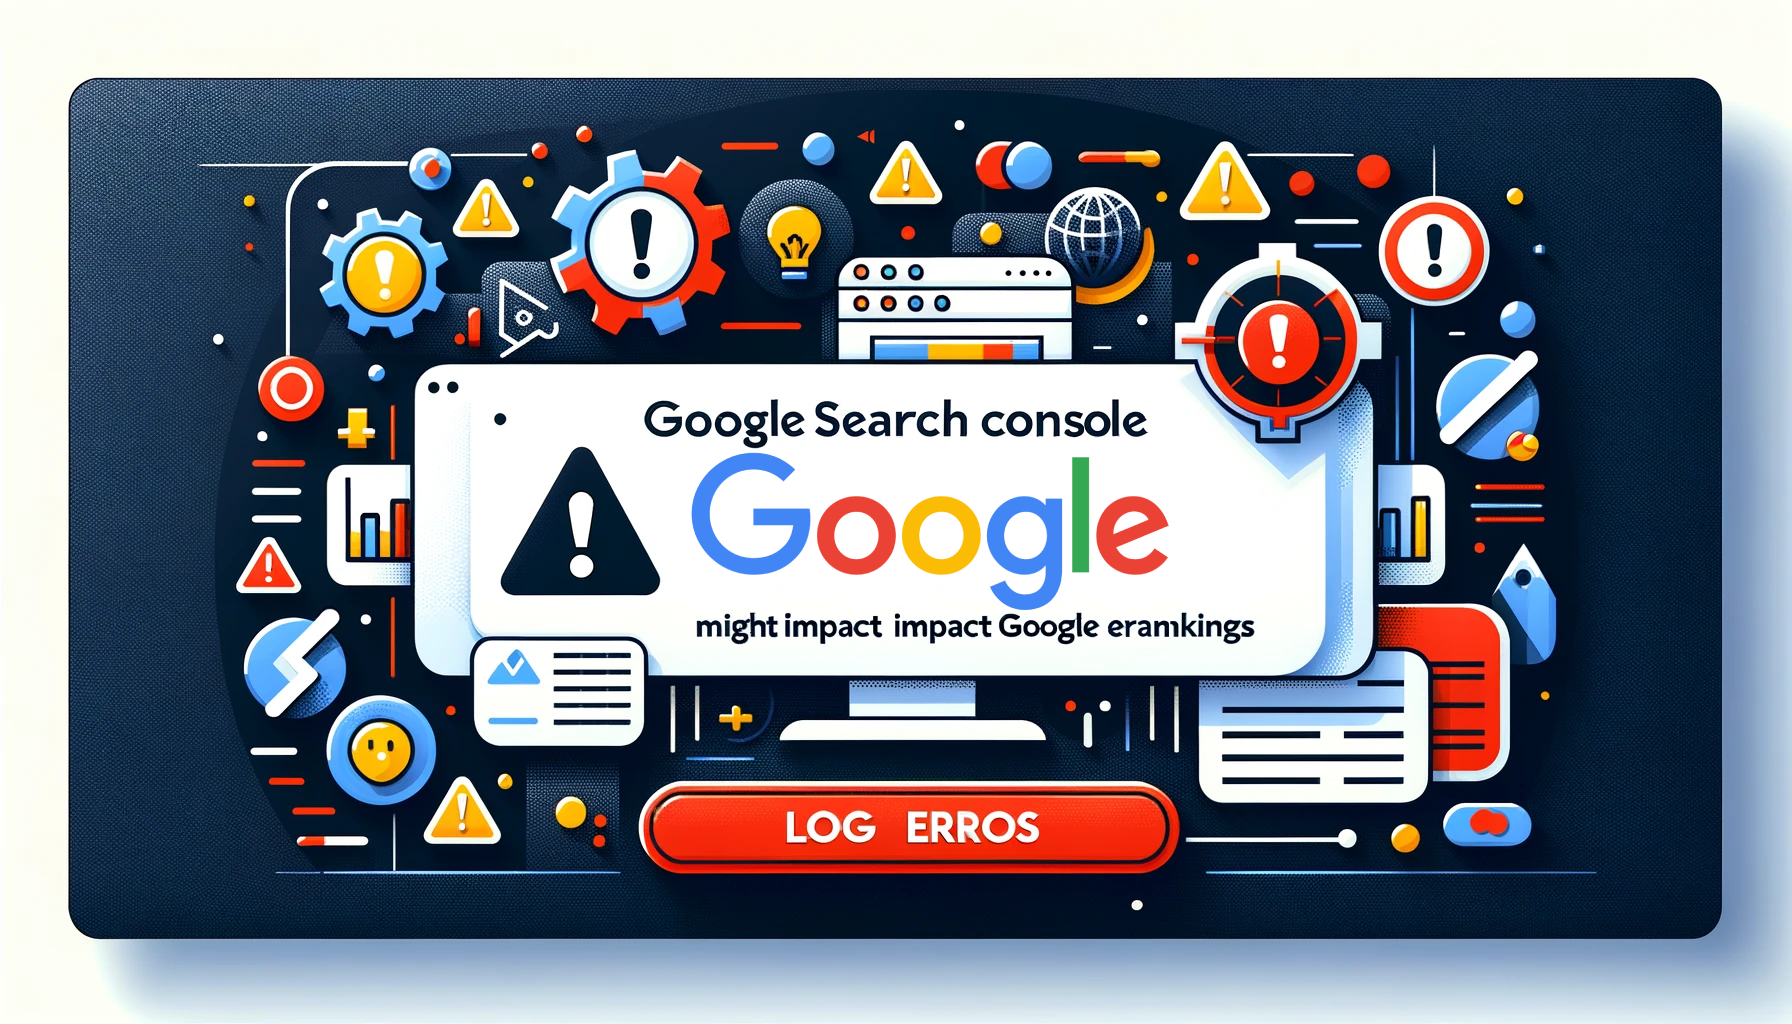 Google Search Console' confirming 'log errors' that might impact Google search rankings